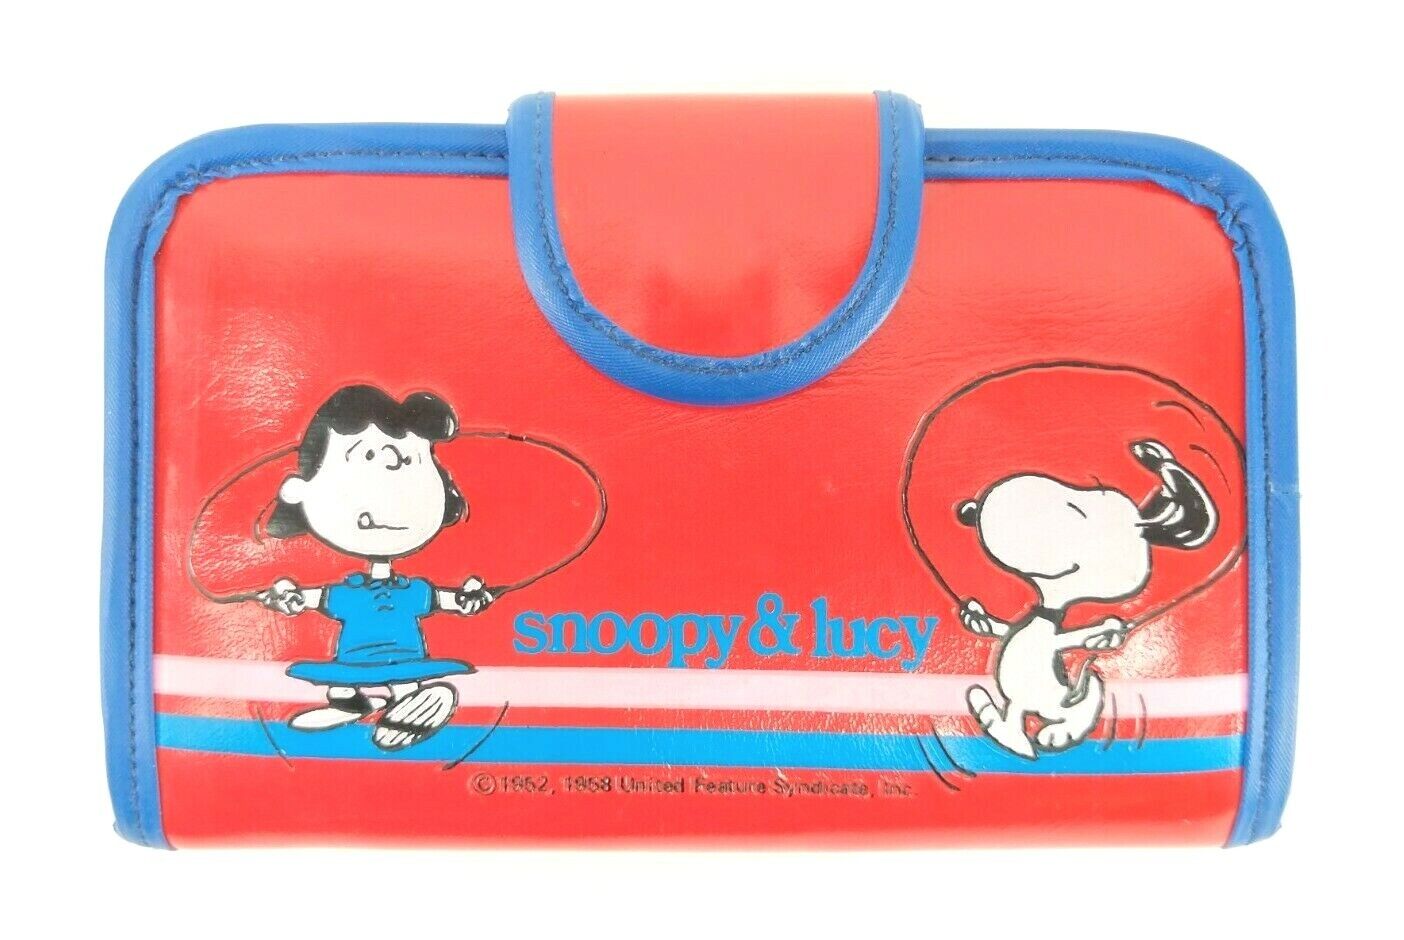 Vintage 1965 Peanuts Snoopy & Lucy Red Wallet Clutch Coin Purse